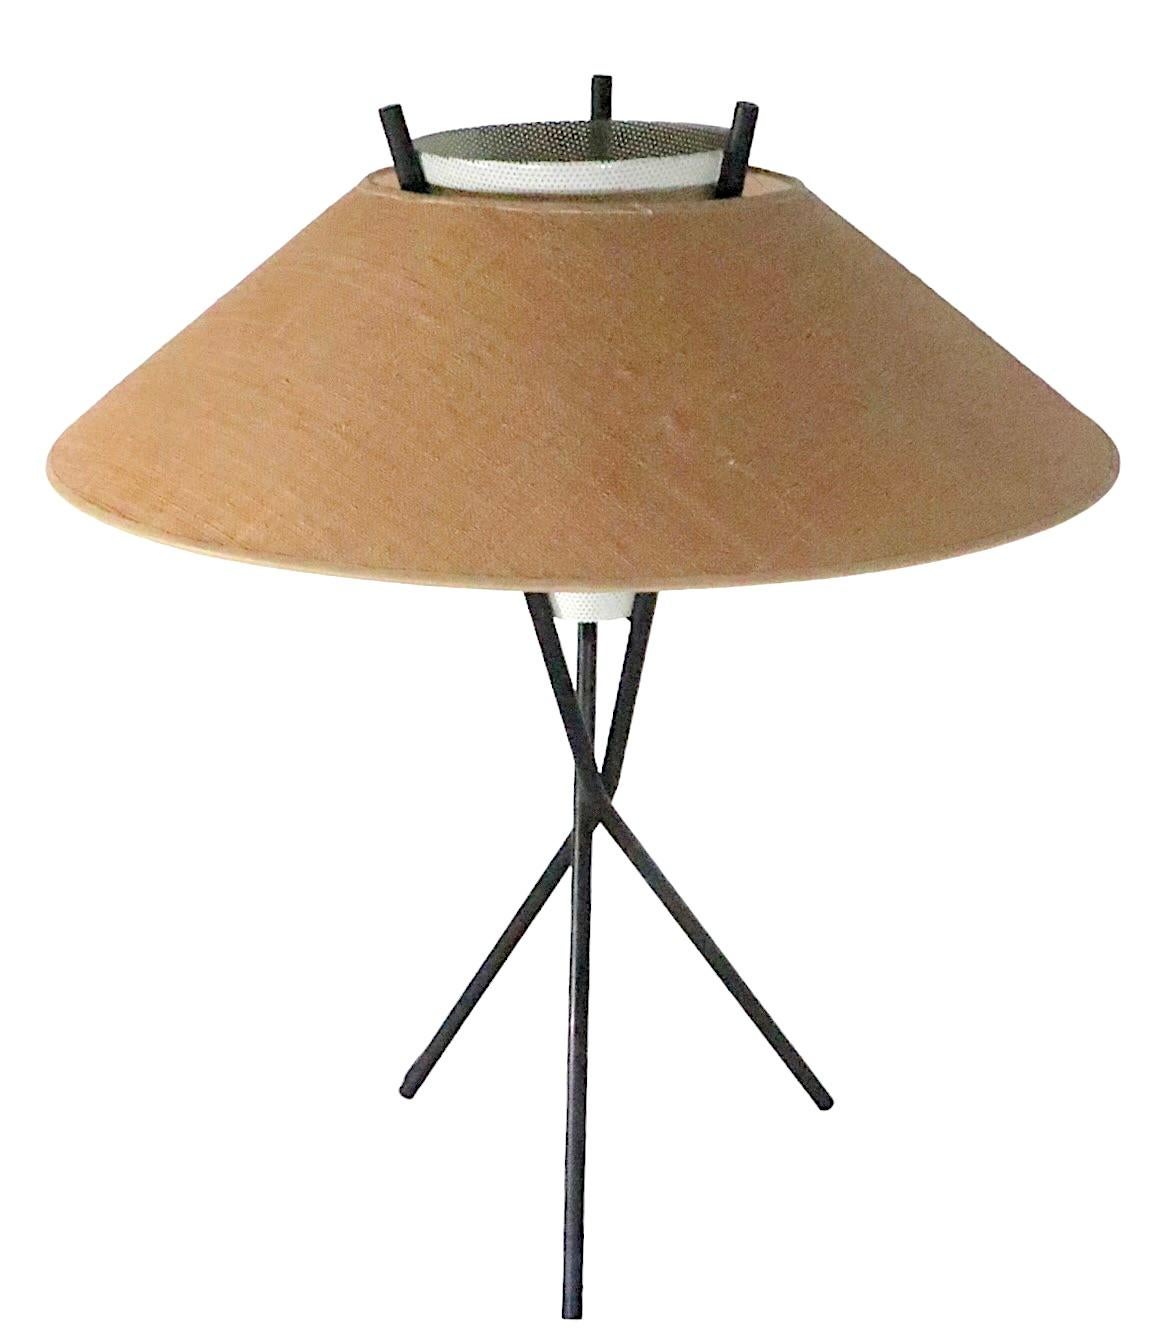 Midcentury Tri Pod Table Lamp by Gerald Thurston for Lightolier C 1950s In Good Condition For Sale In New York, NY